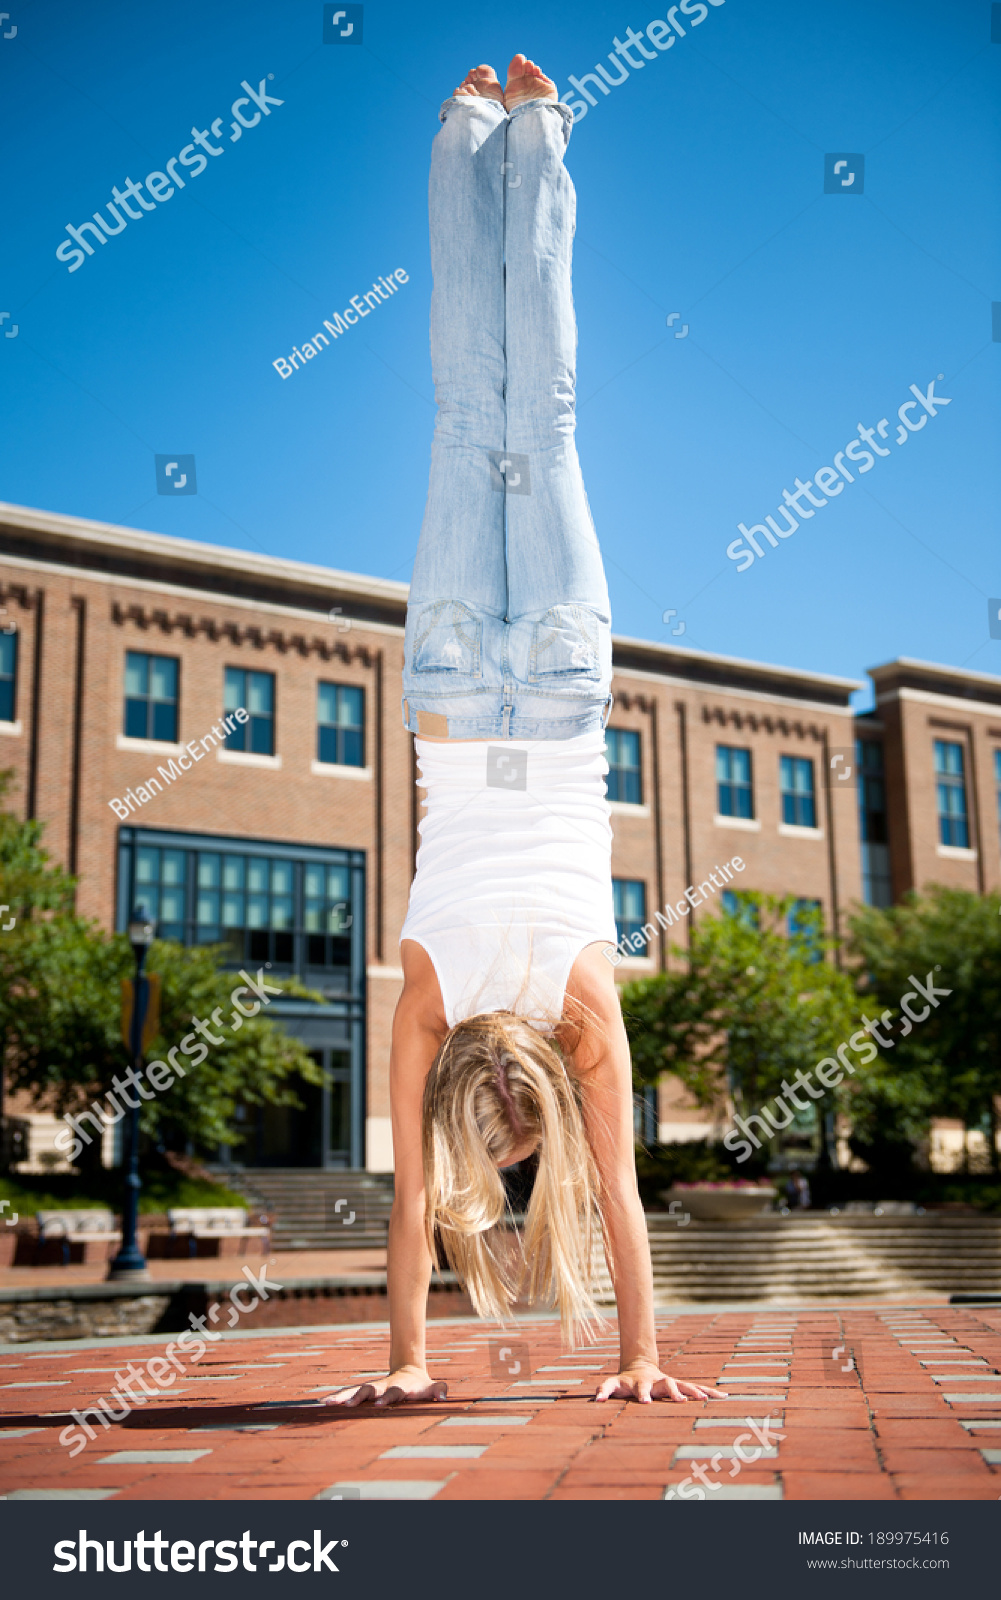 https://image.shutterstock.com/shutterstock/photos/189975416/display_1500/stock-photo-athletic-young-woman-doing-a-hand-stand-in-urban-setting-189975416.jpg